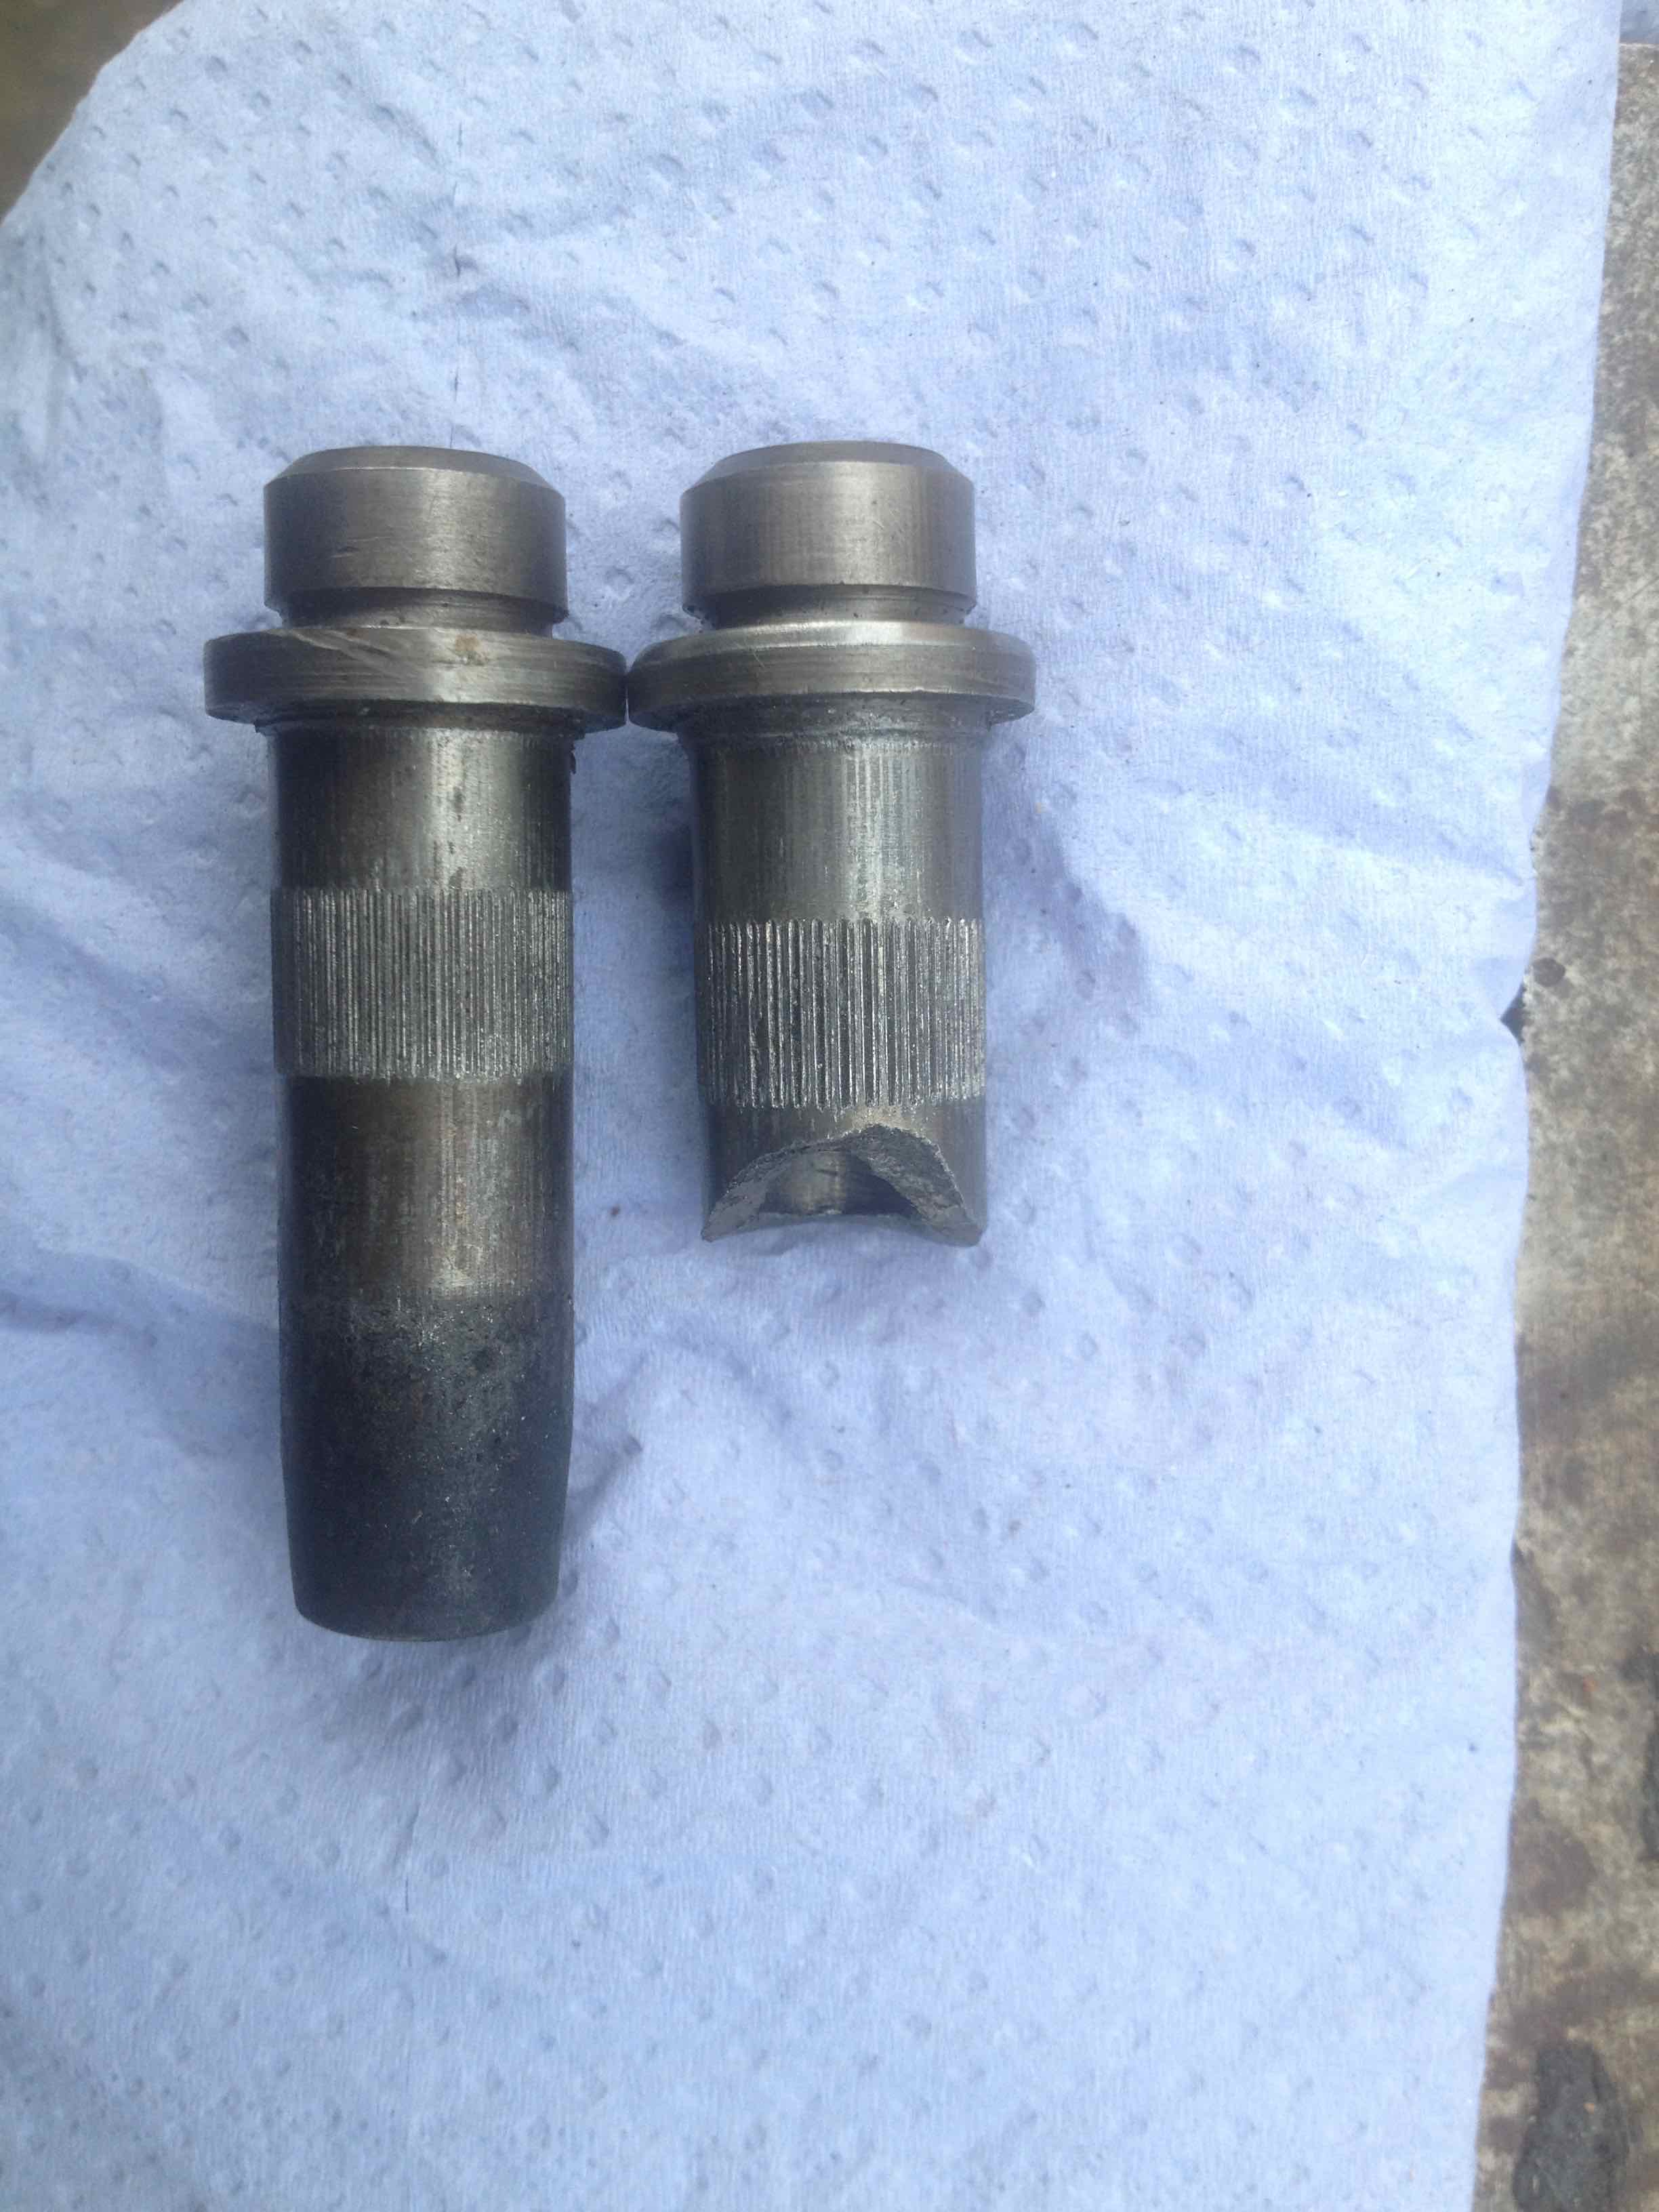 Knurled inlet valve guides